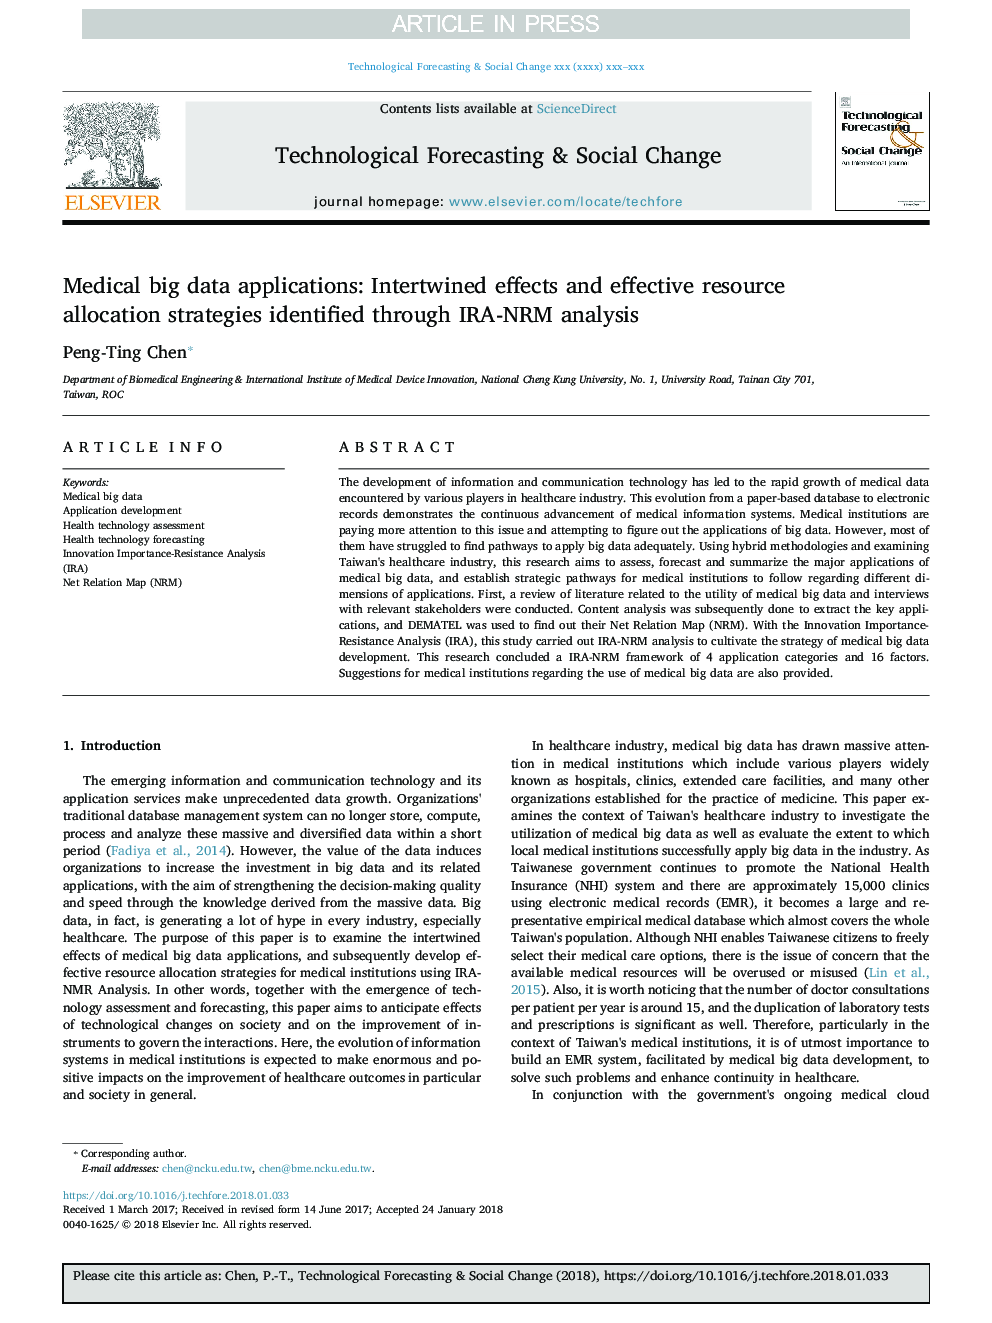 Medical big data applications: Intertwined effects and effective resource allocation strategies identified through IRA-NRM analysis